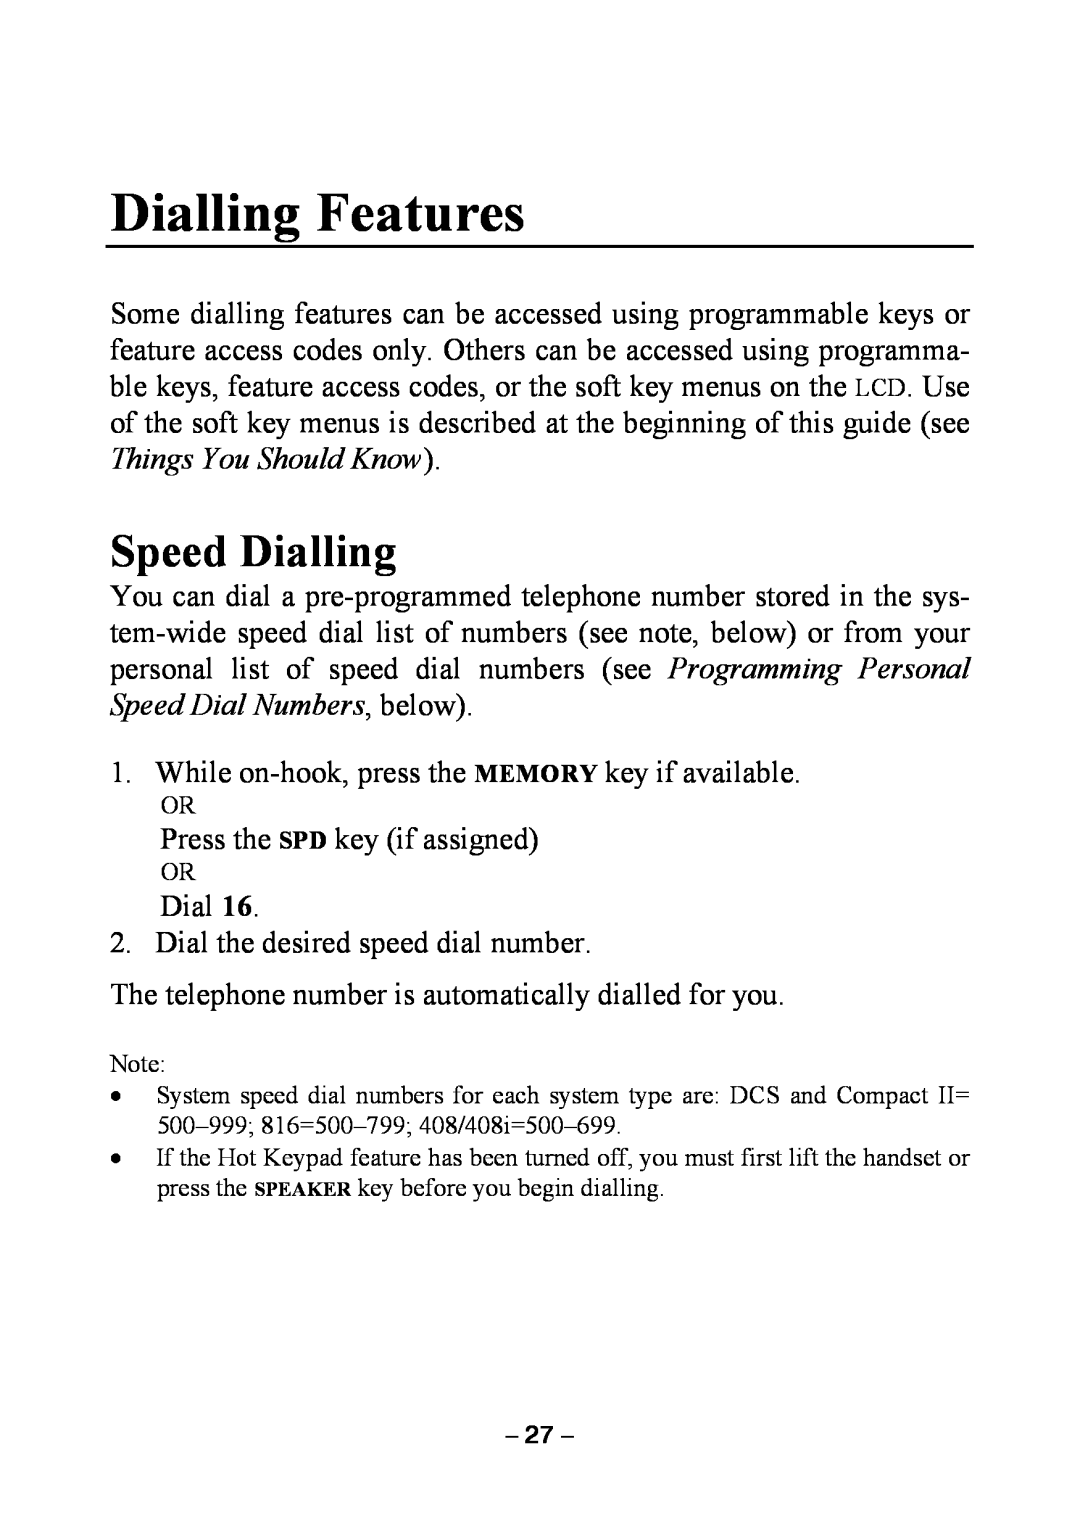 Samsung DCS KEYSET manual Dialling Features, Speed Dialling 